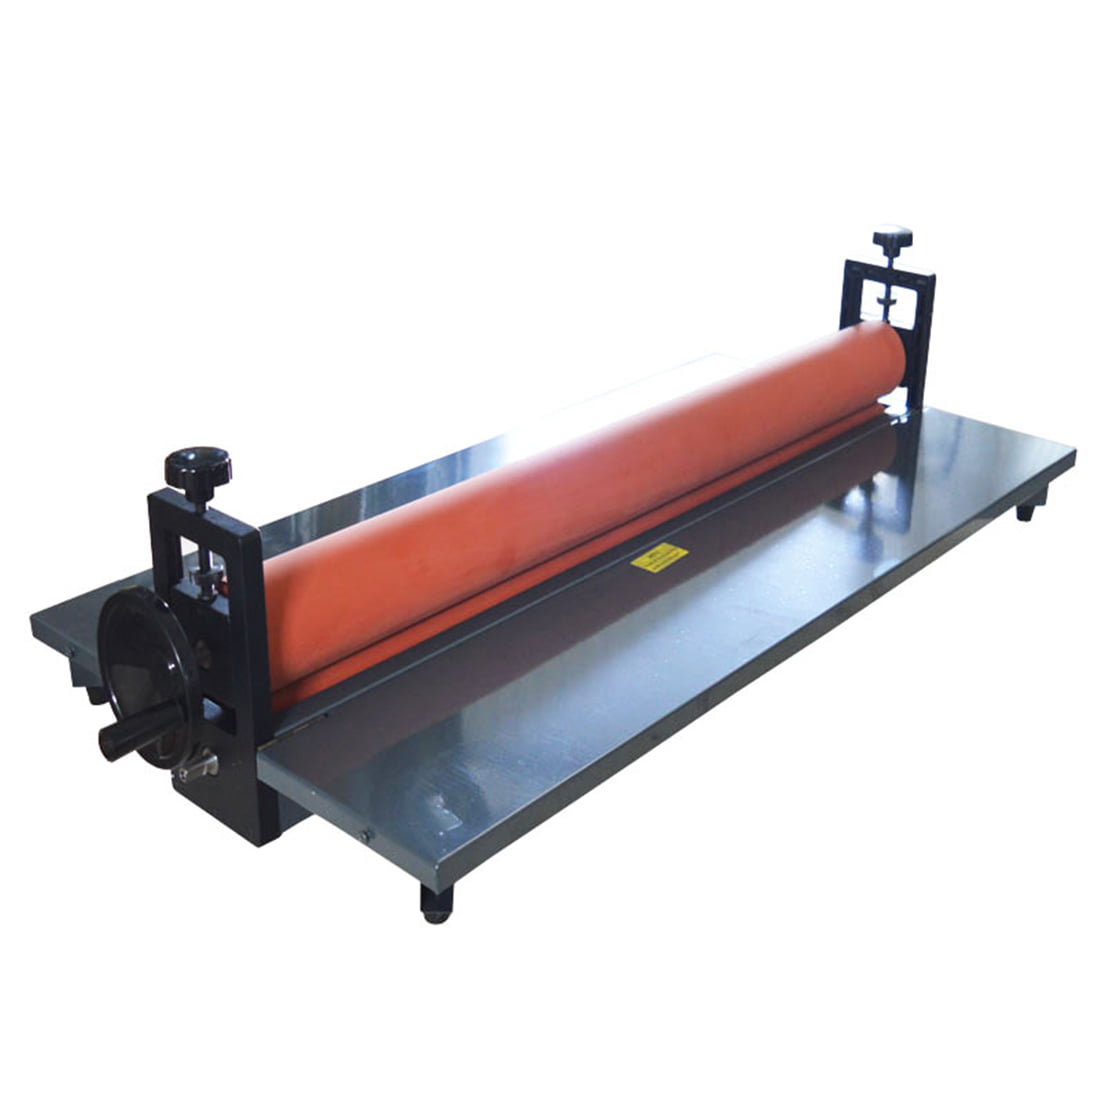 Thermal Hot Cold Laminator Machine Pack Warms Up Laminating Pouches Sheets 